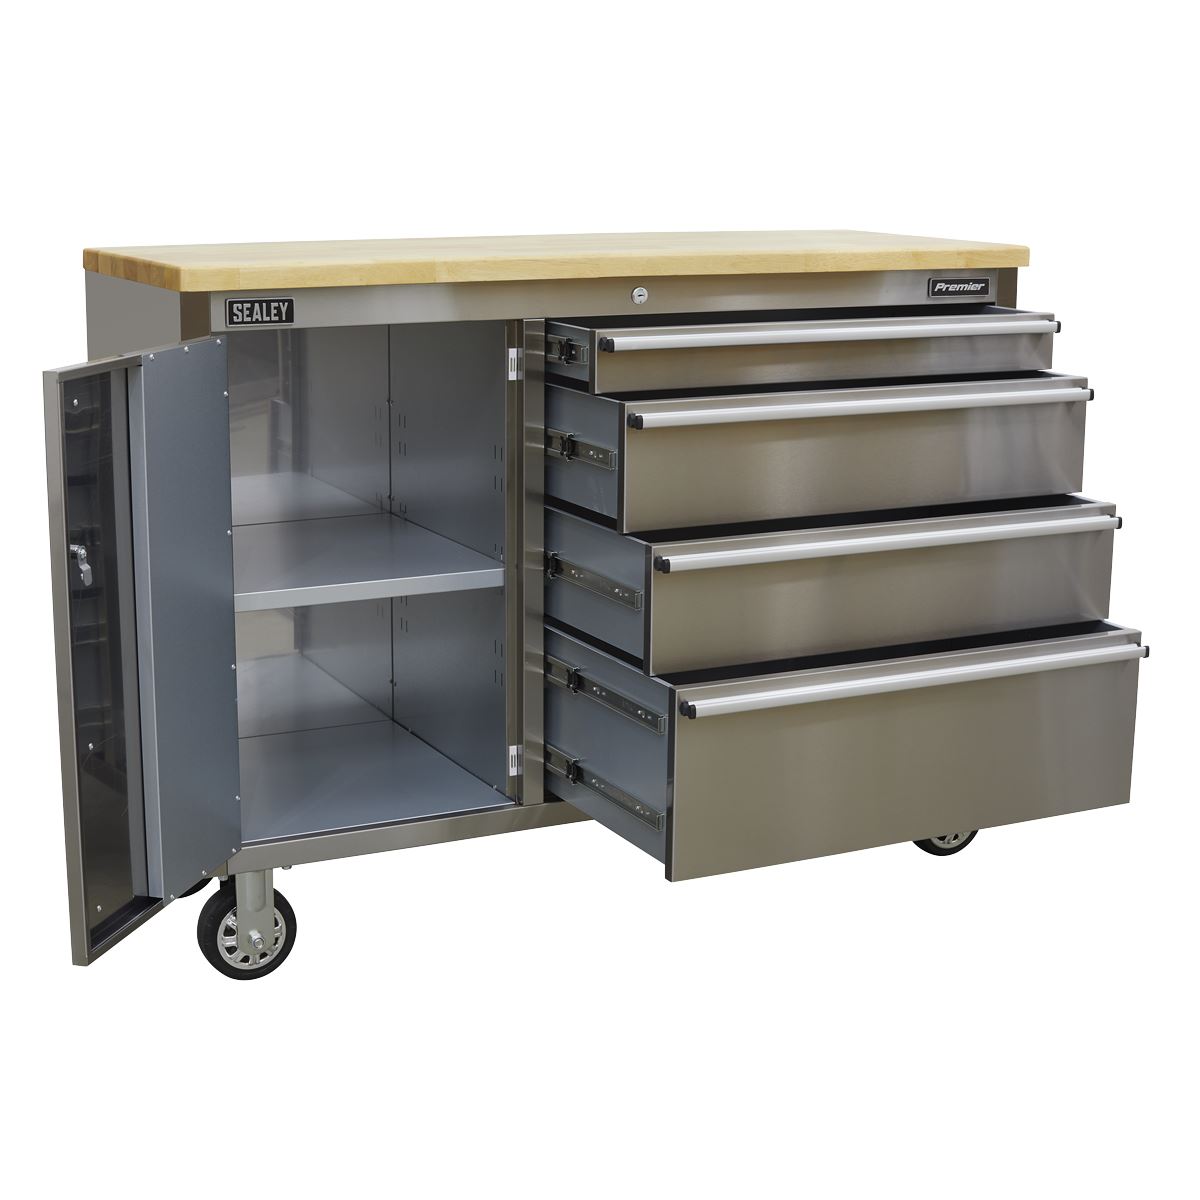 Sealey Premier Mobile Stainless Steel Tool Cabinet 4 Drawer